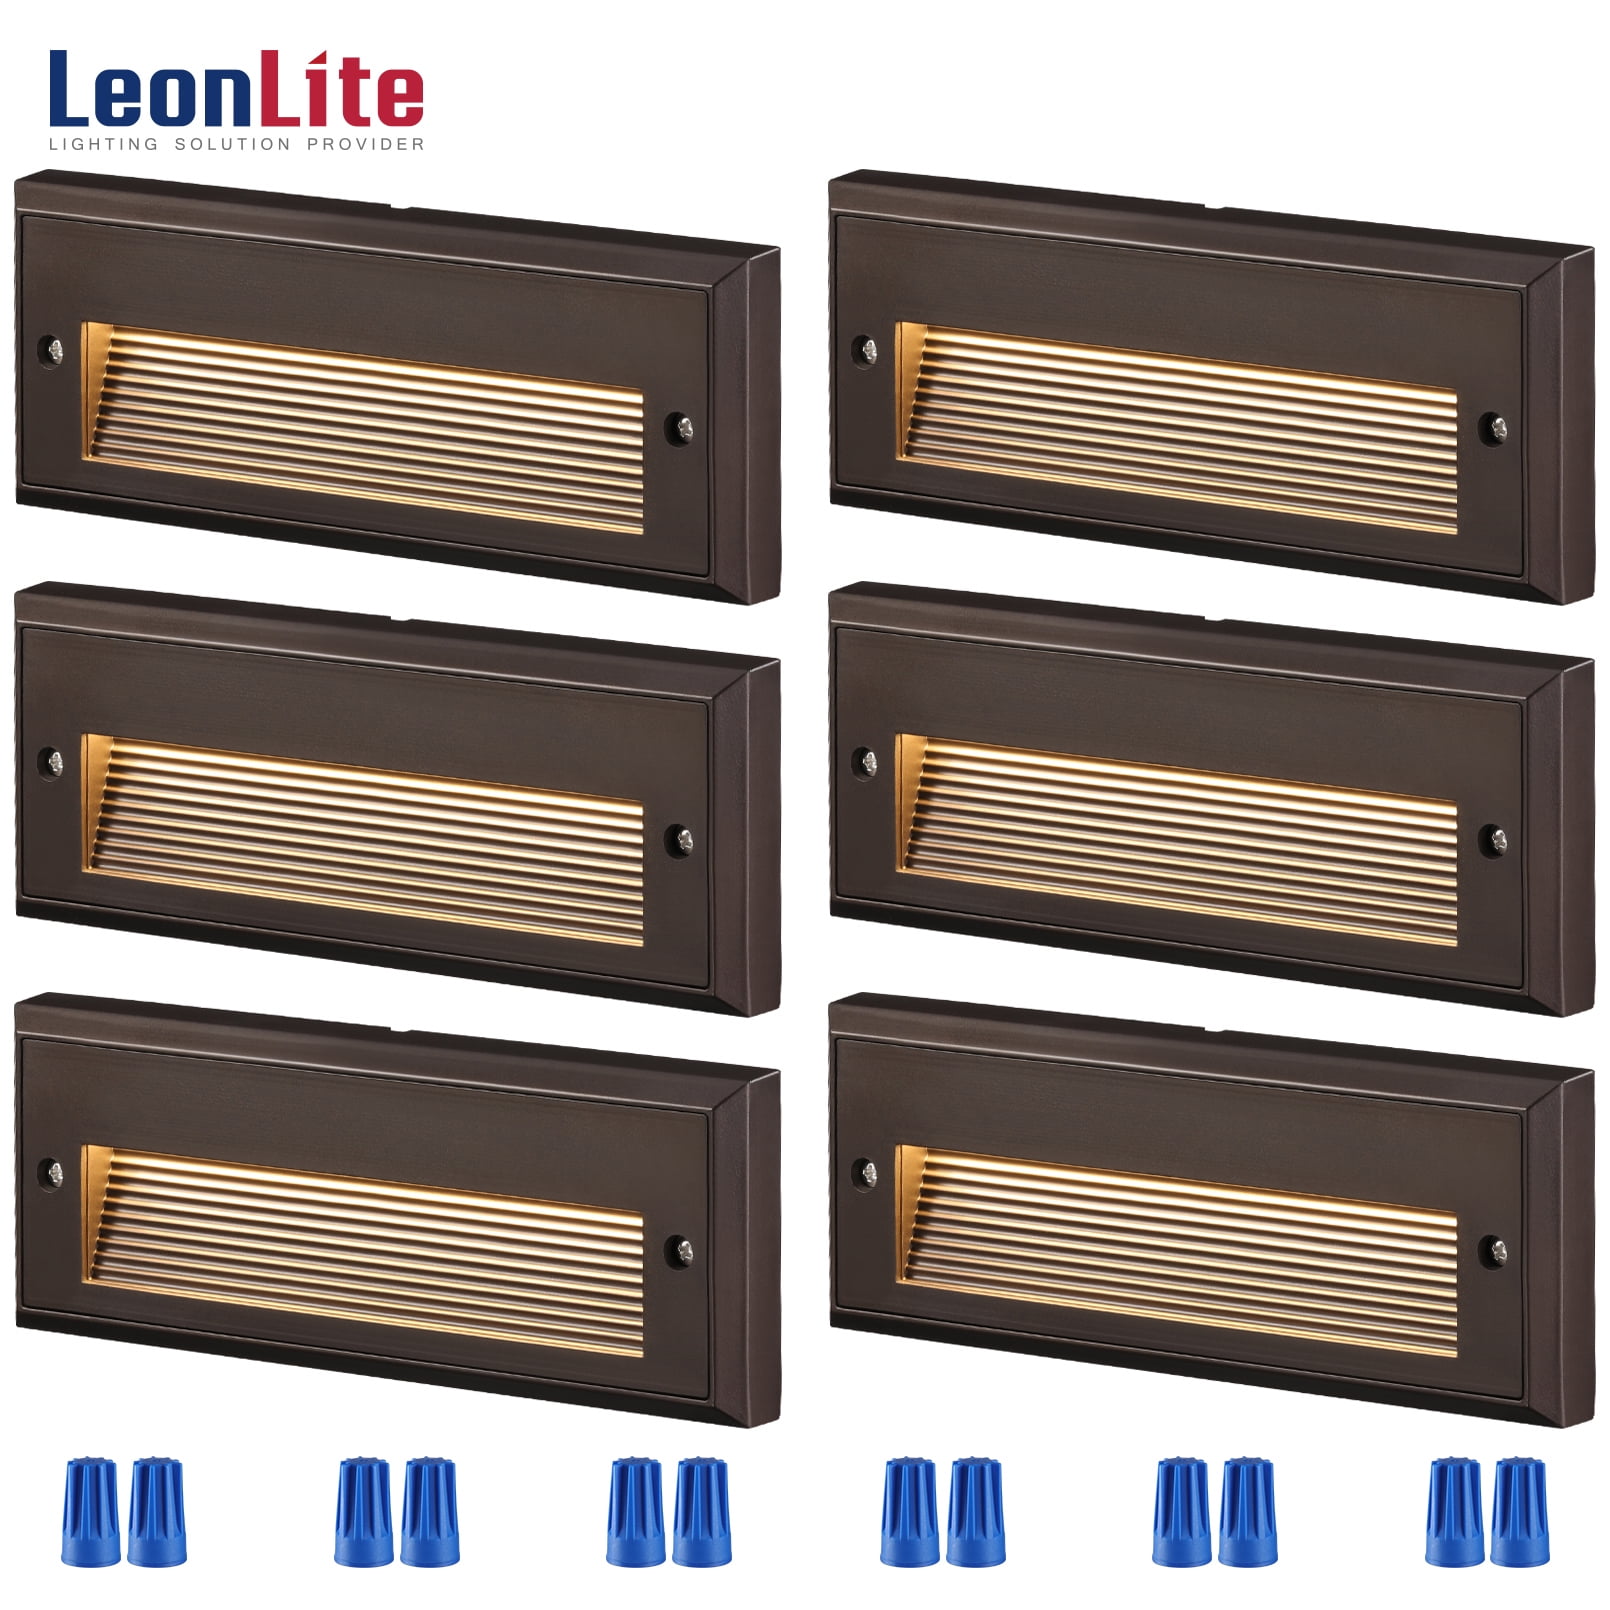 LEONLITE Low Voltage LED Step Lights Outdoor, 12V 3.5W Landscape Stair  Lights, Anti-Glare Surface Mount Deck Light, UL Listed, IP65 Waterproof,  Aluminum, Oil Rubbed Bronze, 3000K Warm White, Pack of 6 